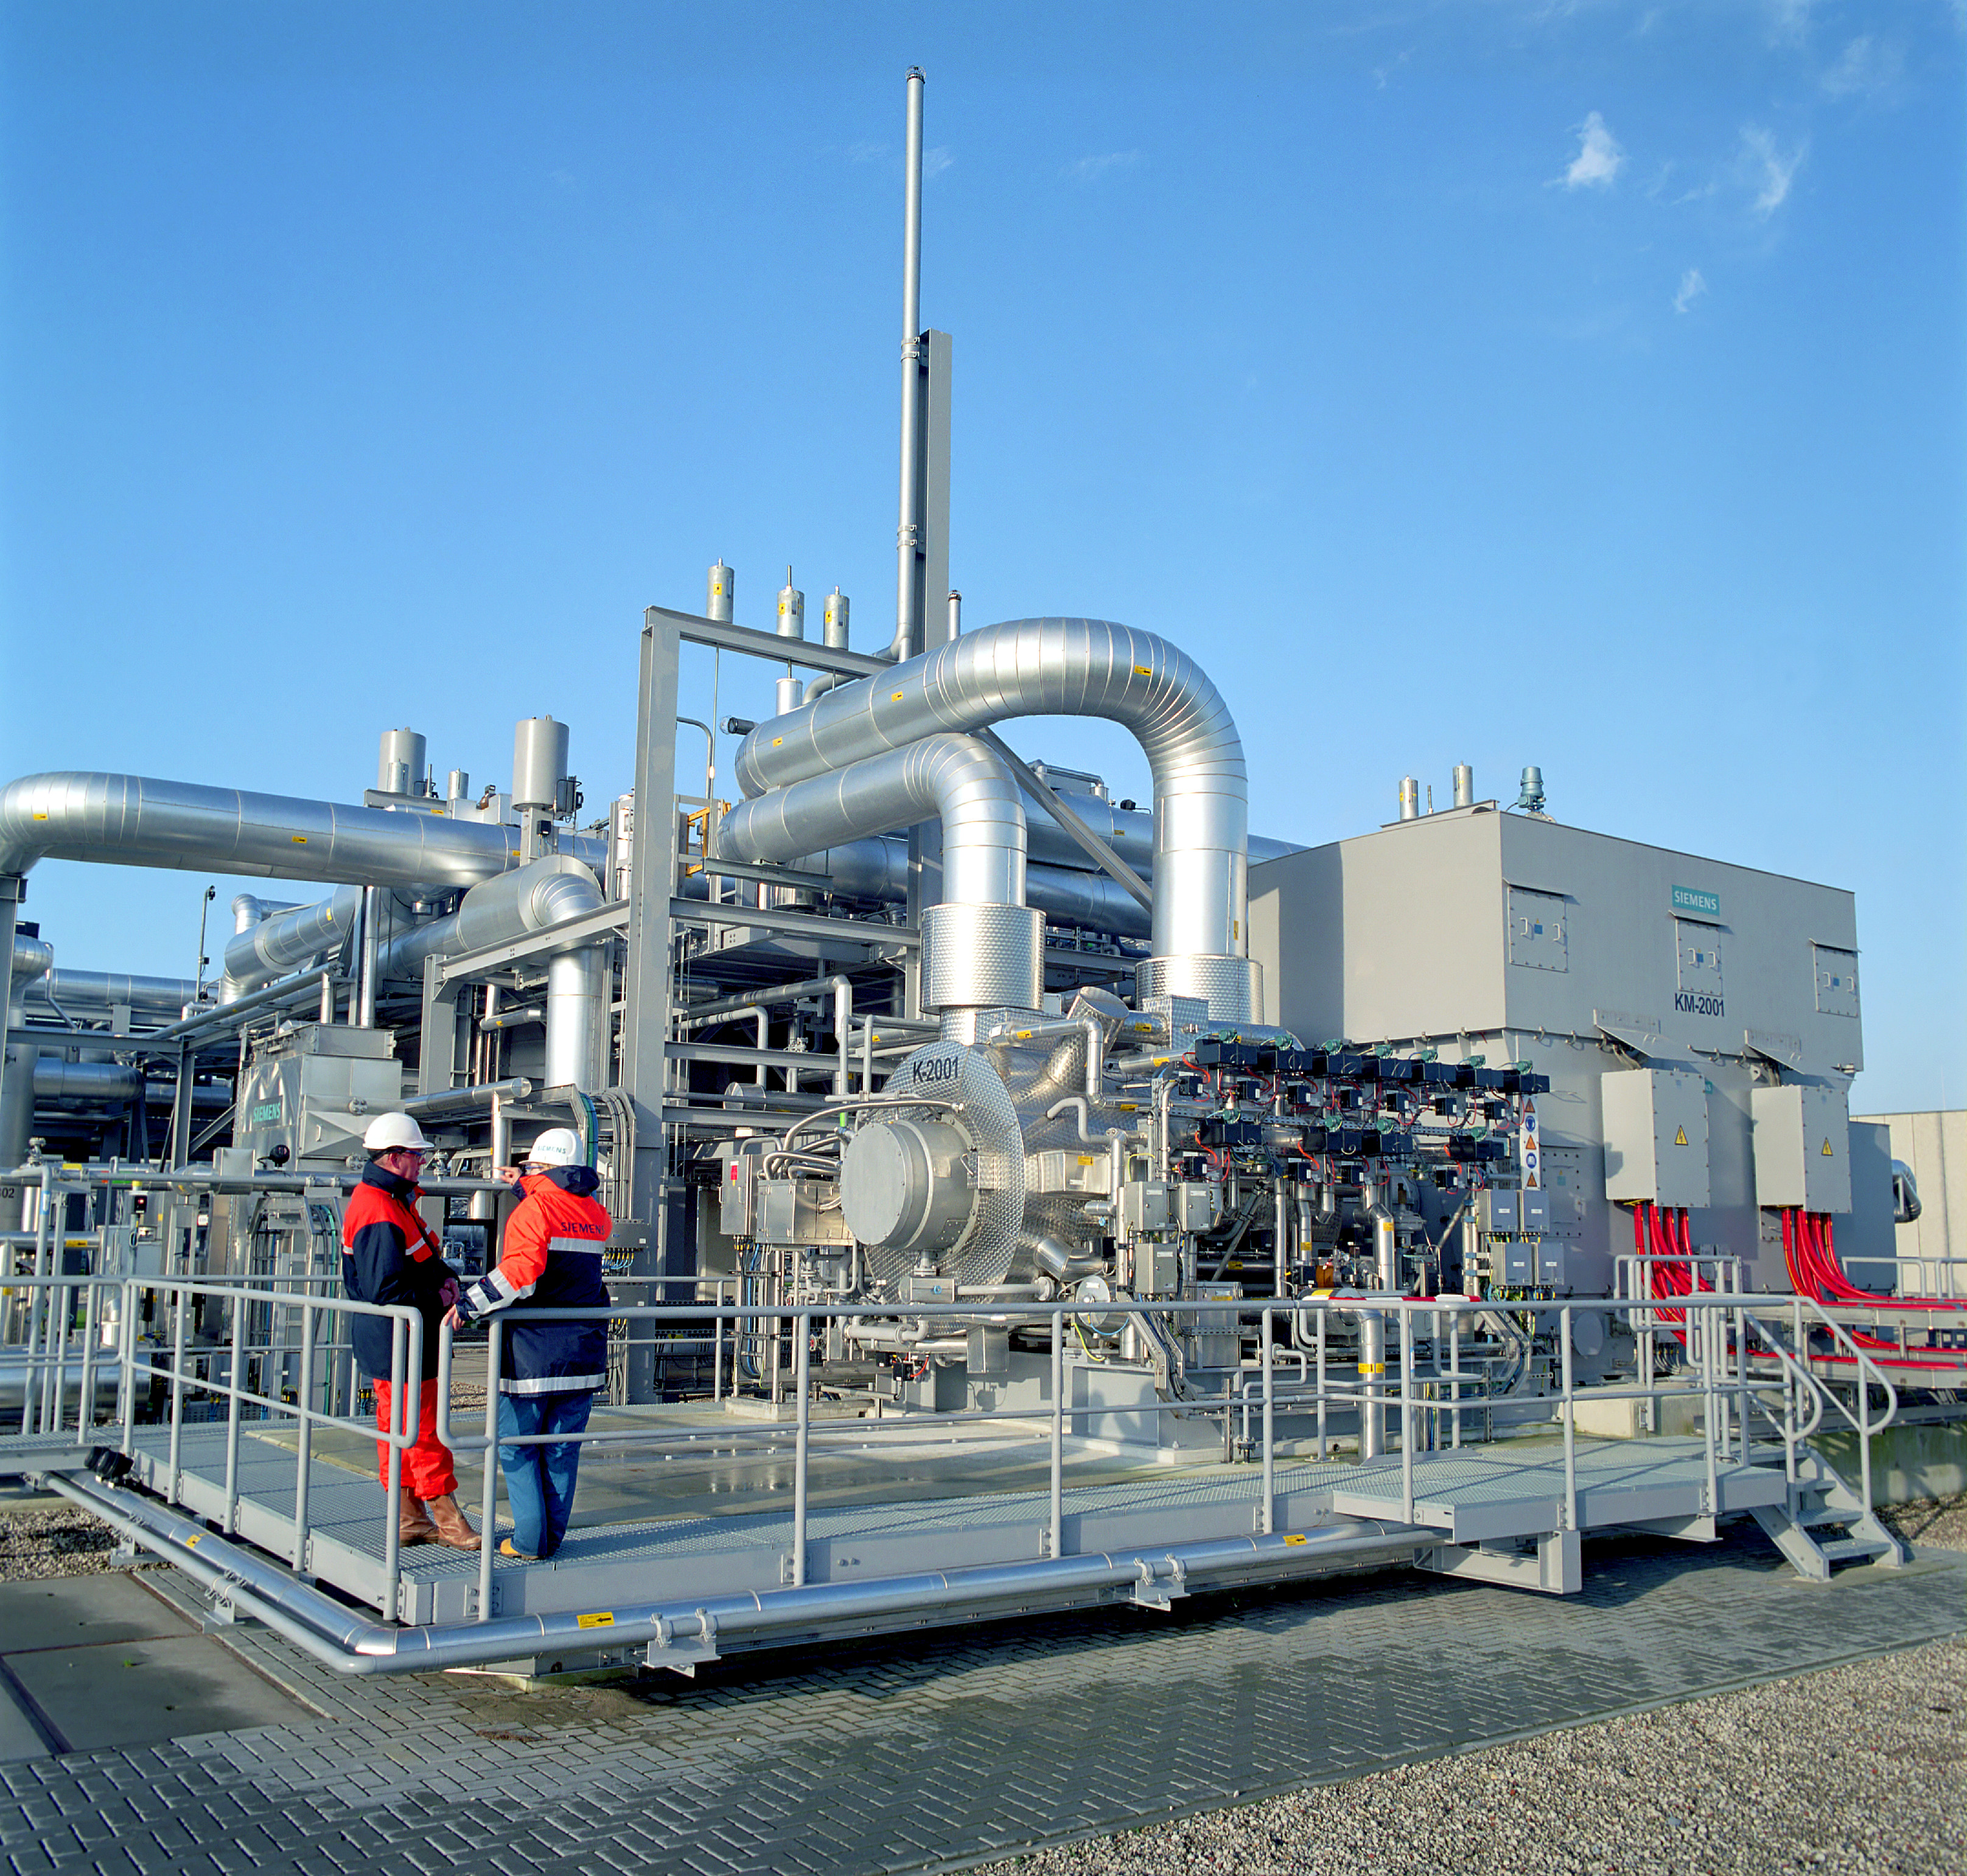 Early engagement with a solutions partner allows customers to evaluate multiple concepts before selecting the optimal system that lowers execution risk and improves return on investment over the life of a gas processing facility.